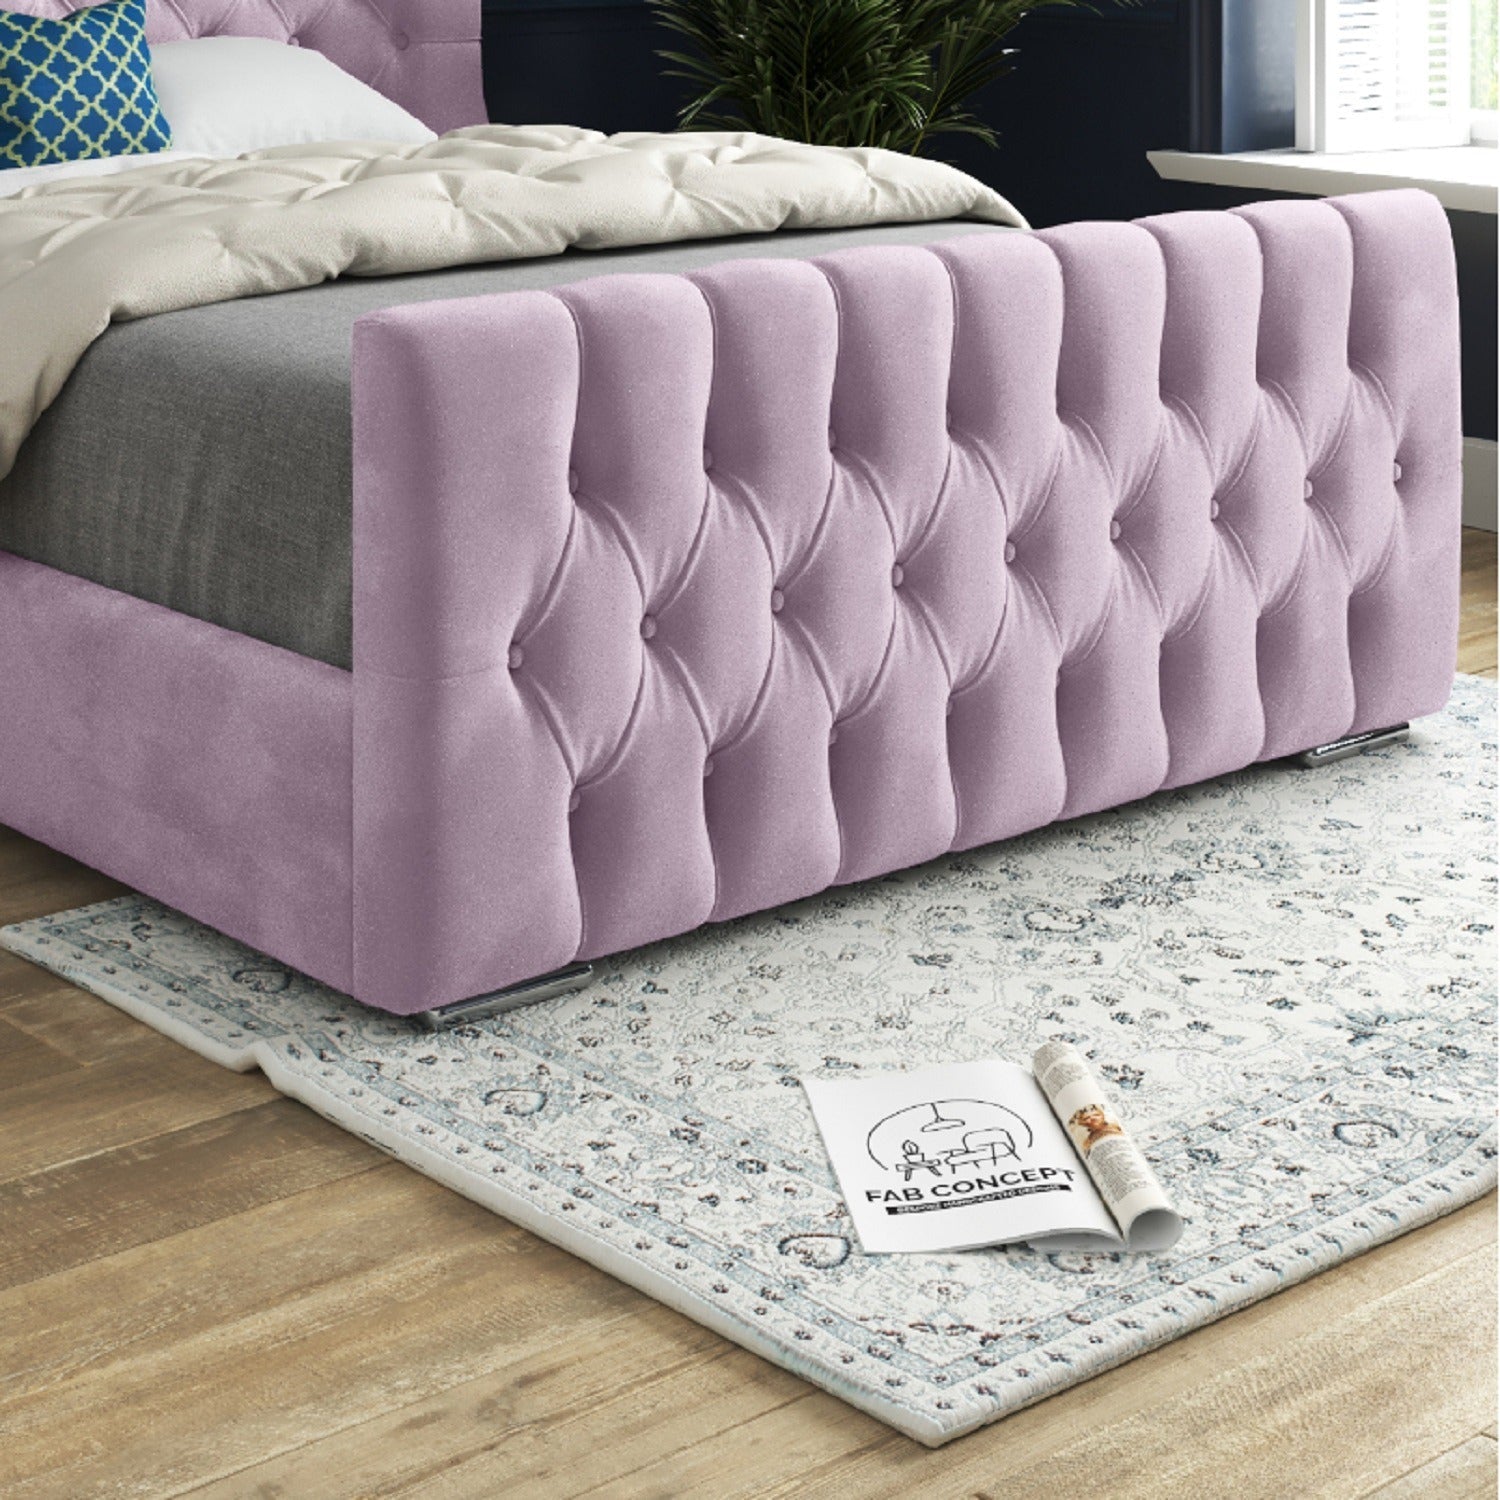 Wingback Wide Curved Upholstered Soft Velvet Fabric Button Bed Frame (Pink)